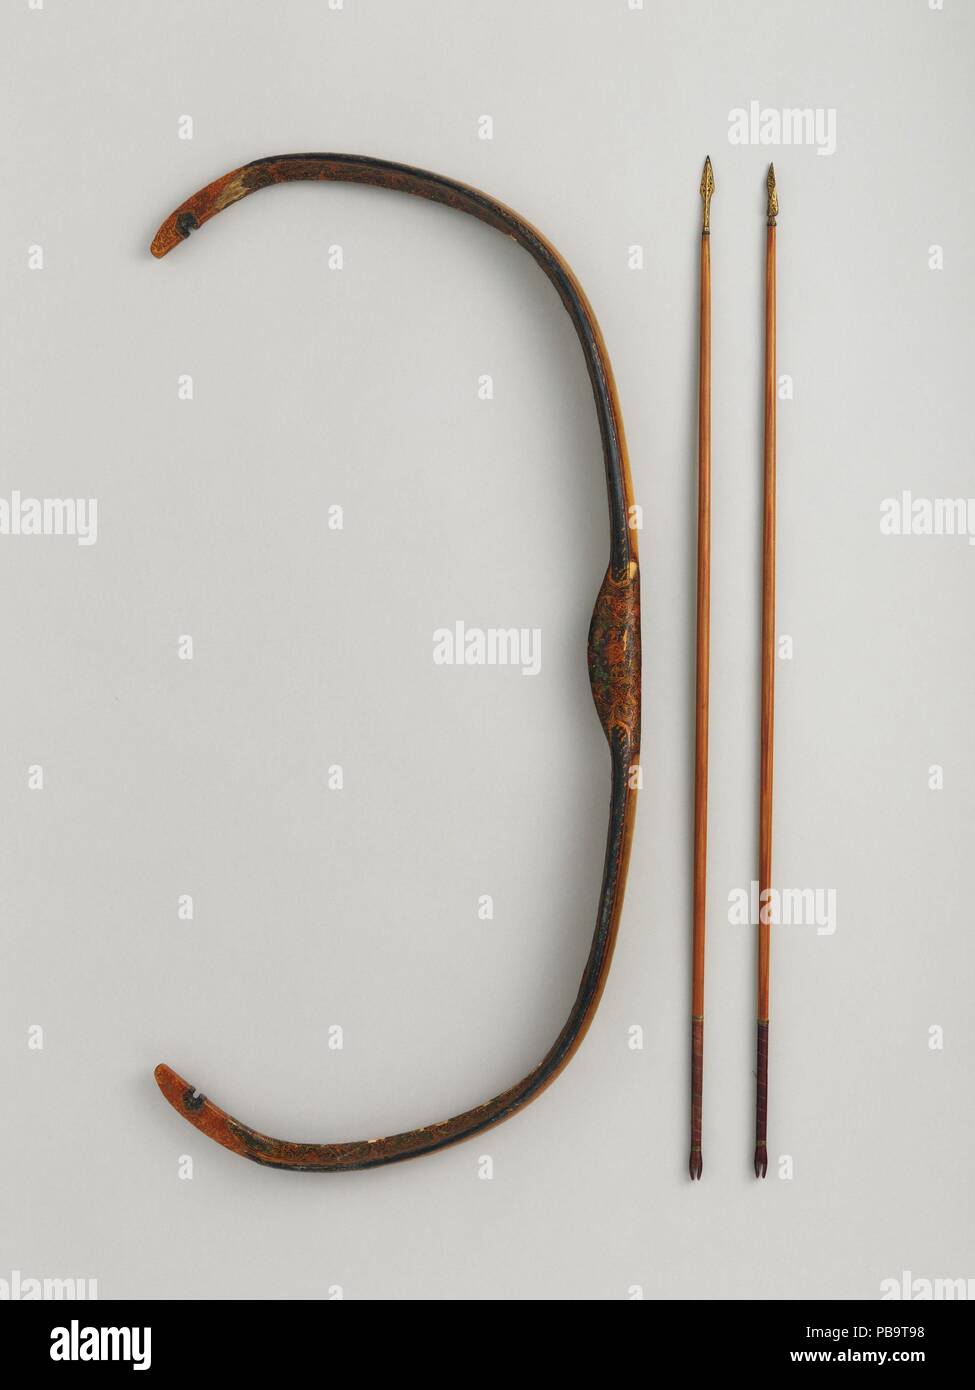 Composite Bow with Forty Arrows. Culture: Turkish. Dimensions: L. 25 1/2 in. (64.8 cm); Wt. 13 oz. (365 g). Date: A.H. 1132/ A.D. 1719-20. Museum: Metropolitan Museum of Art, New York, USA. Stock Photo